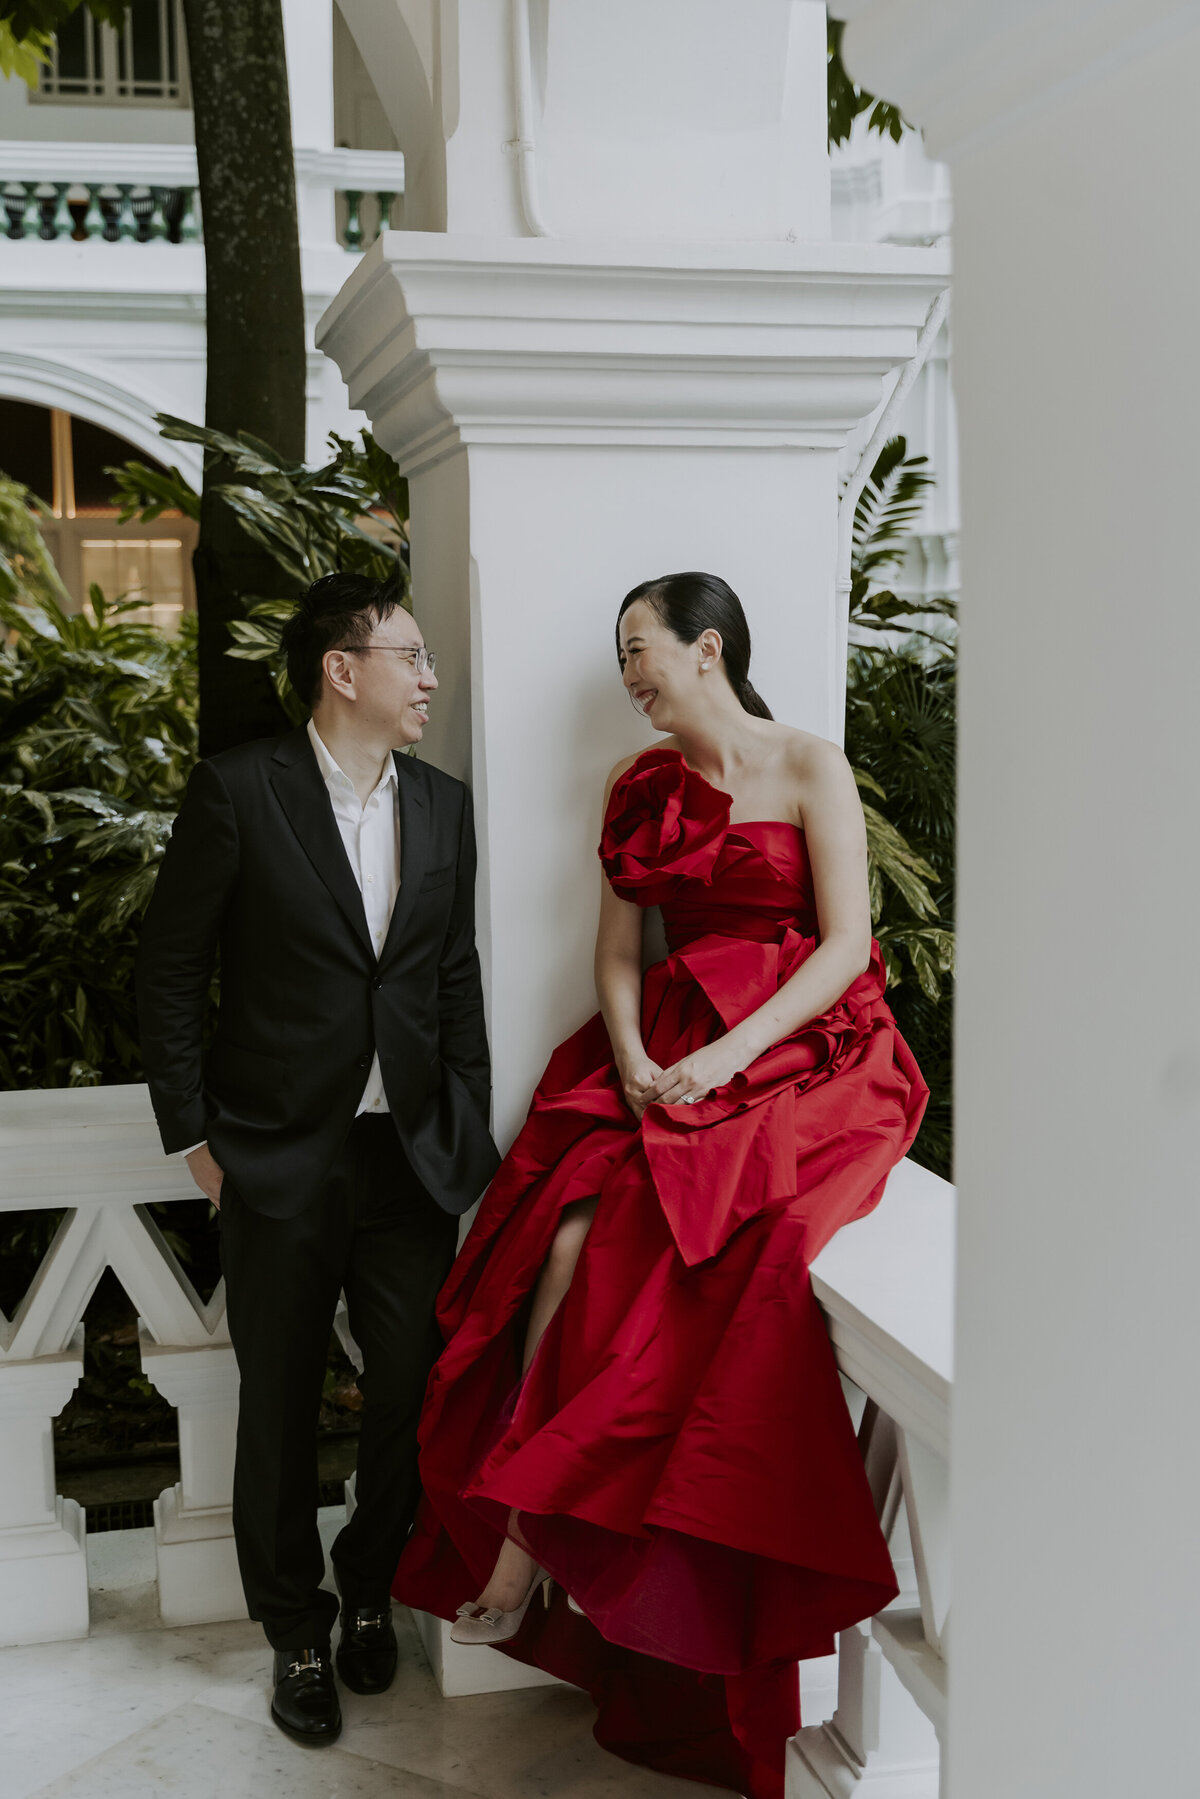 a bride in a red dress and a man in a black suit smile at each other on the balcony